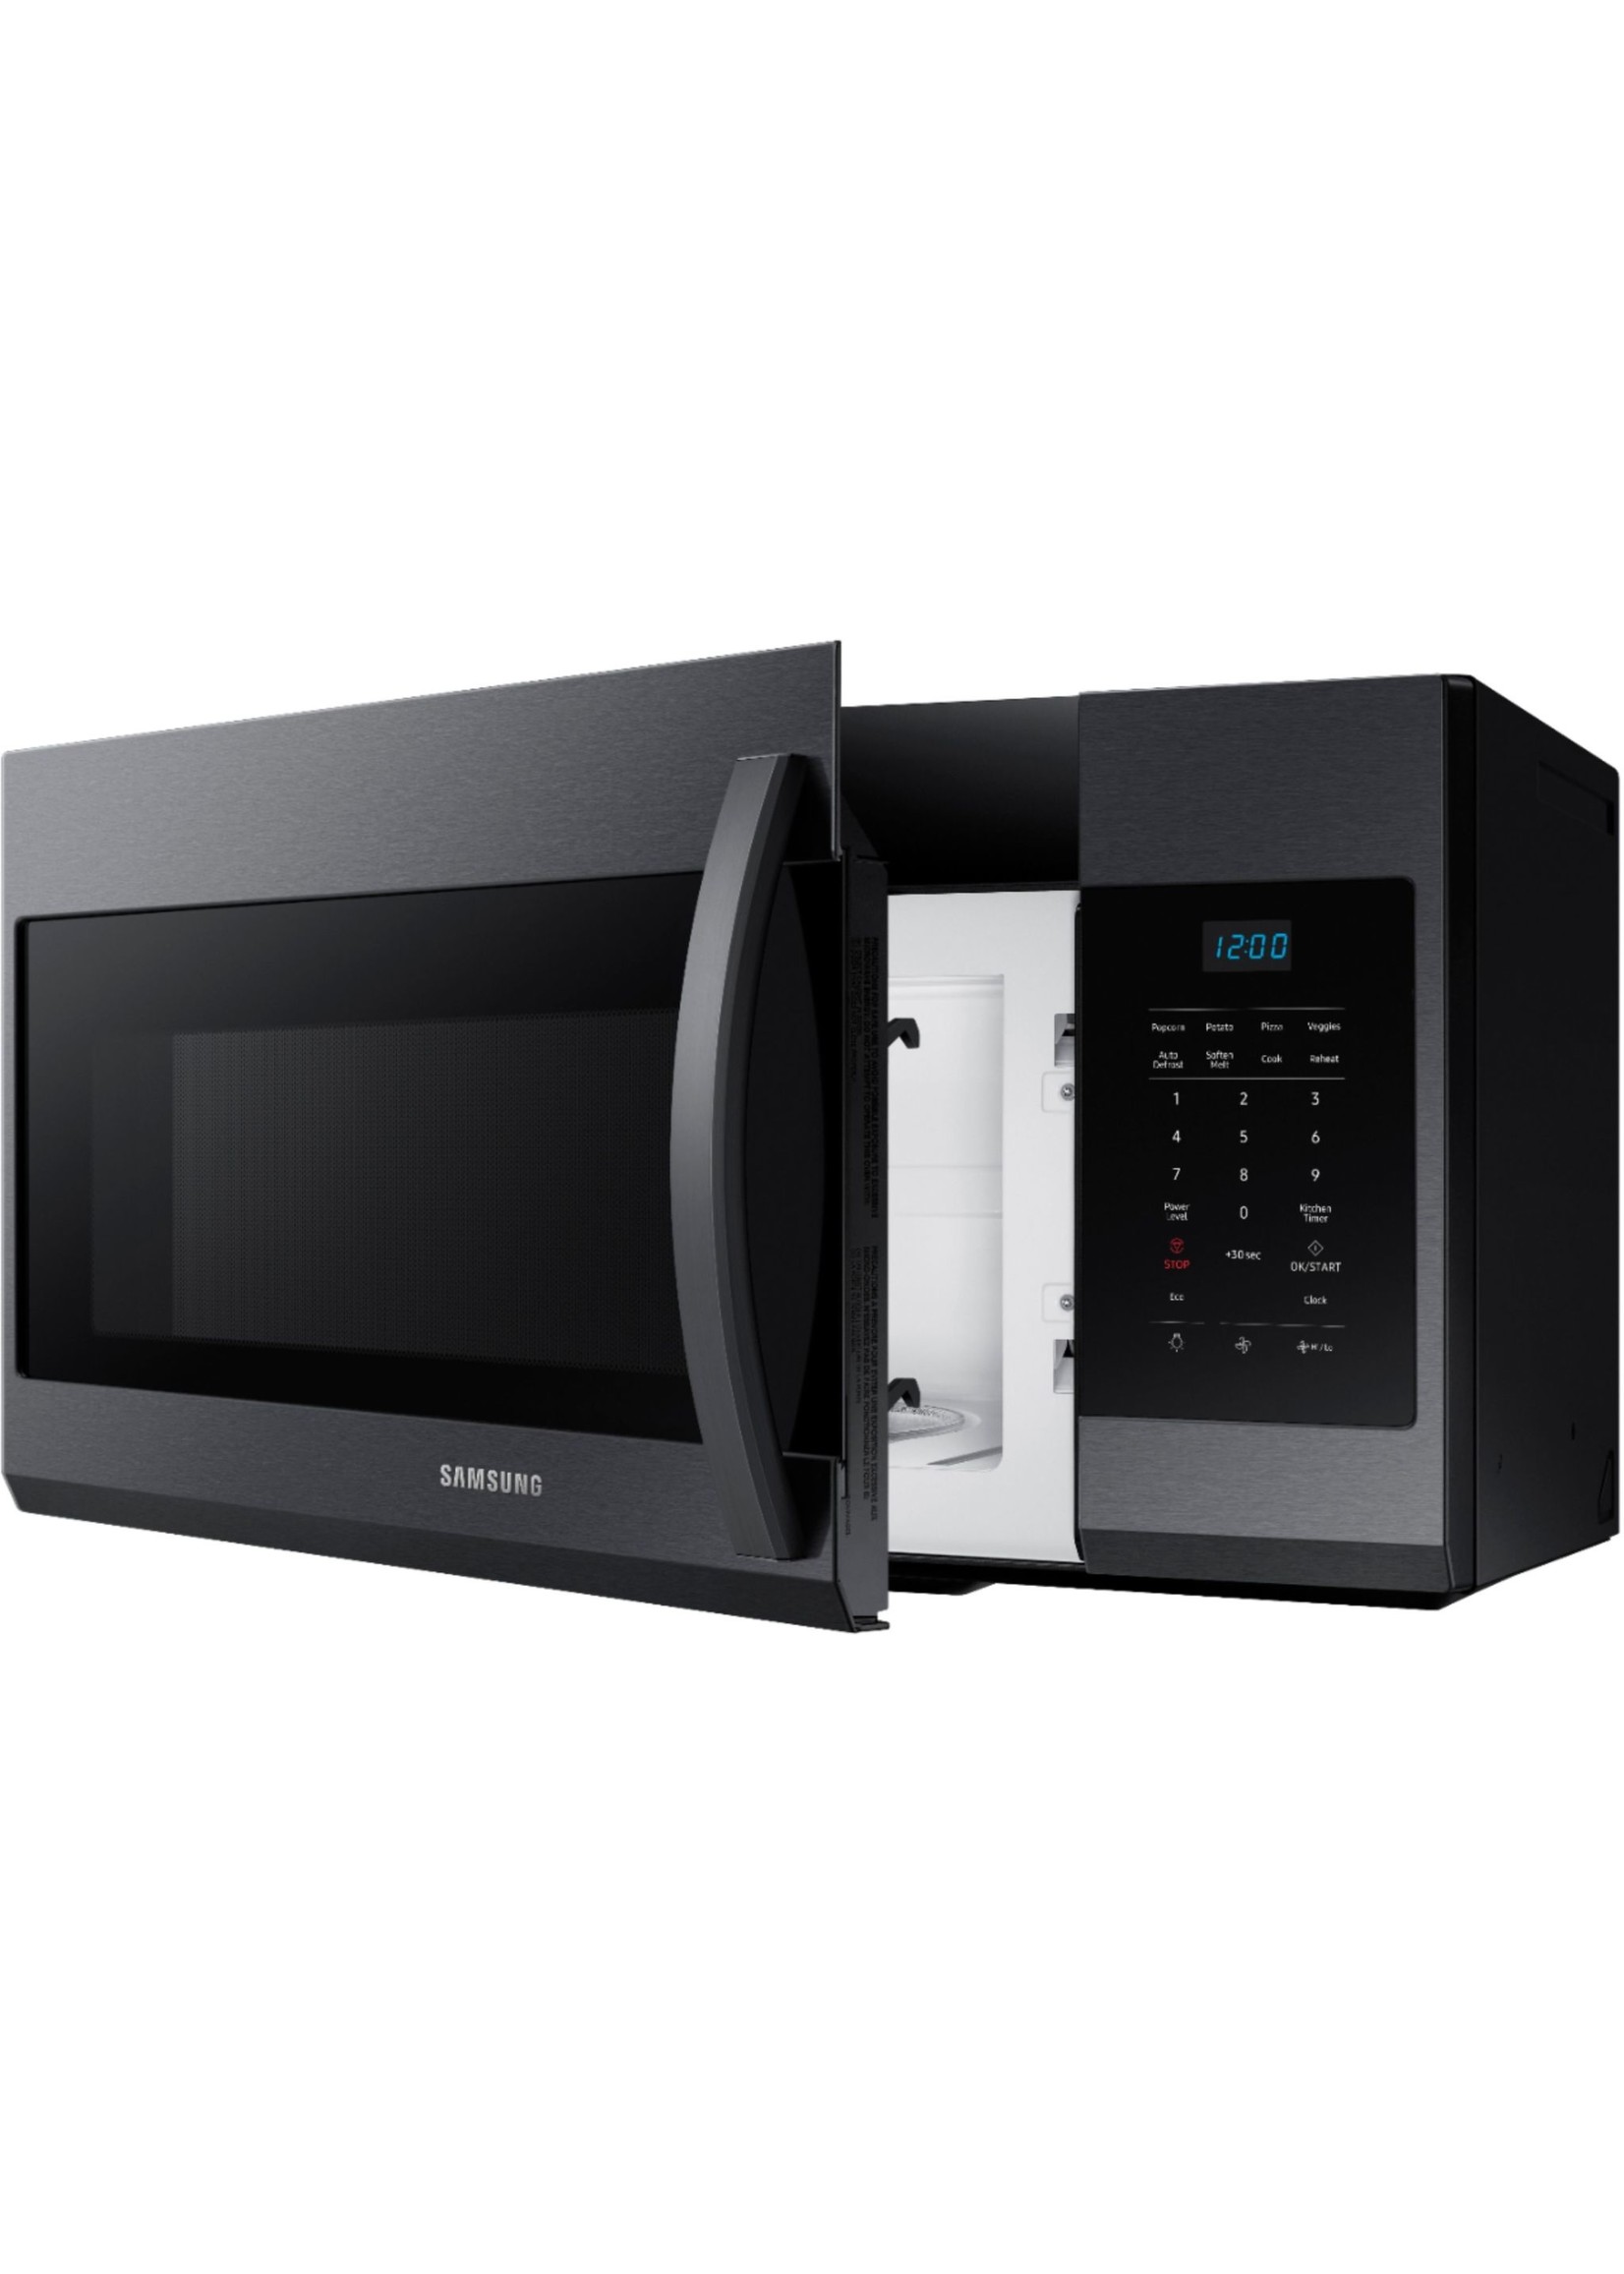 SAMSUNG 1.7 Cu. Ft. Over-the-Range Microwave - Black stainless steel